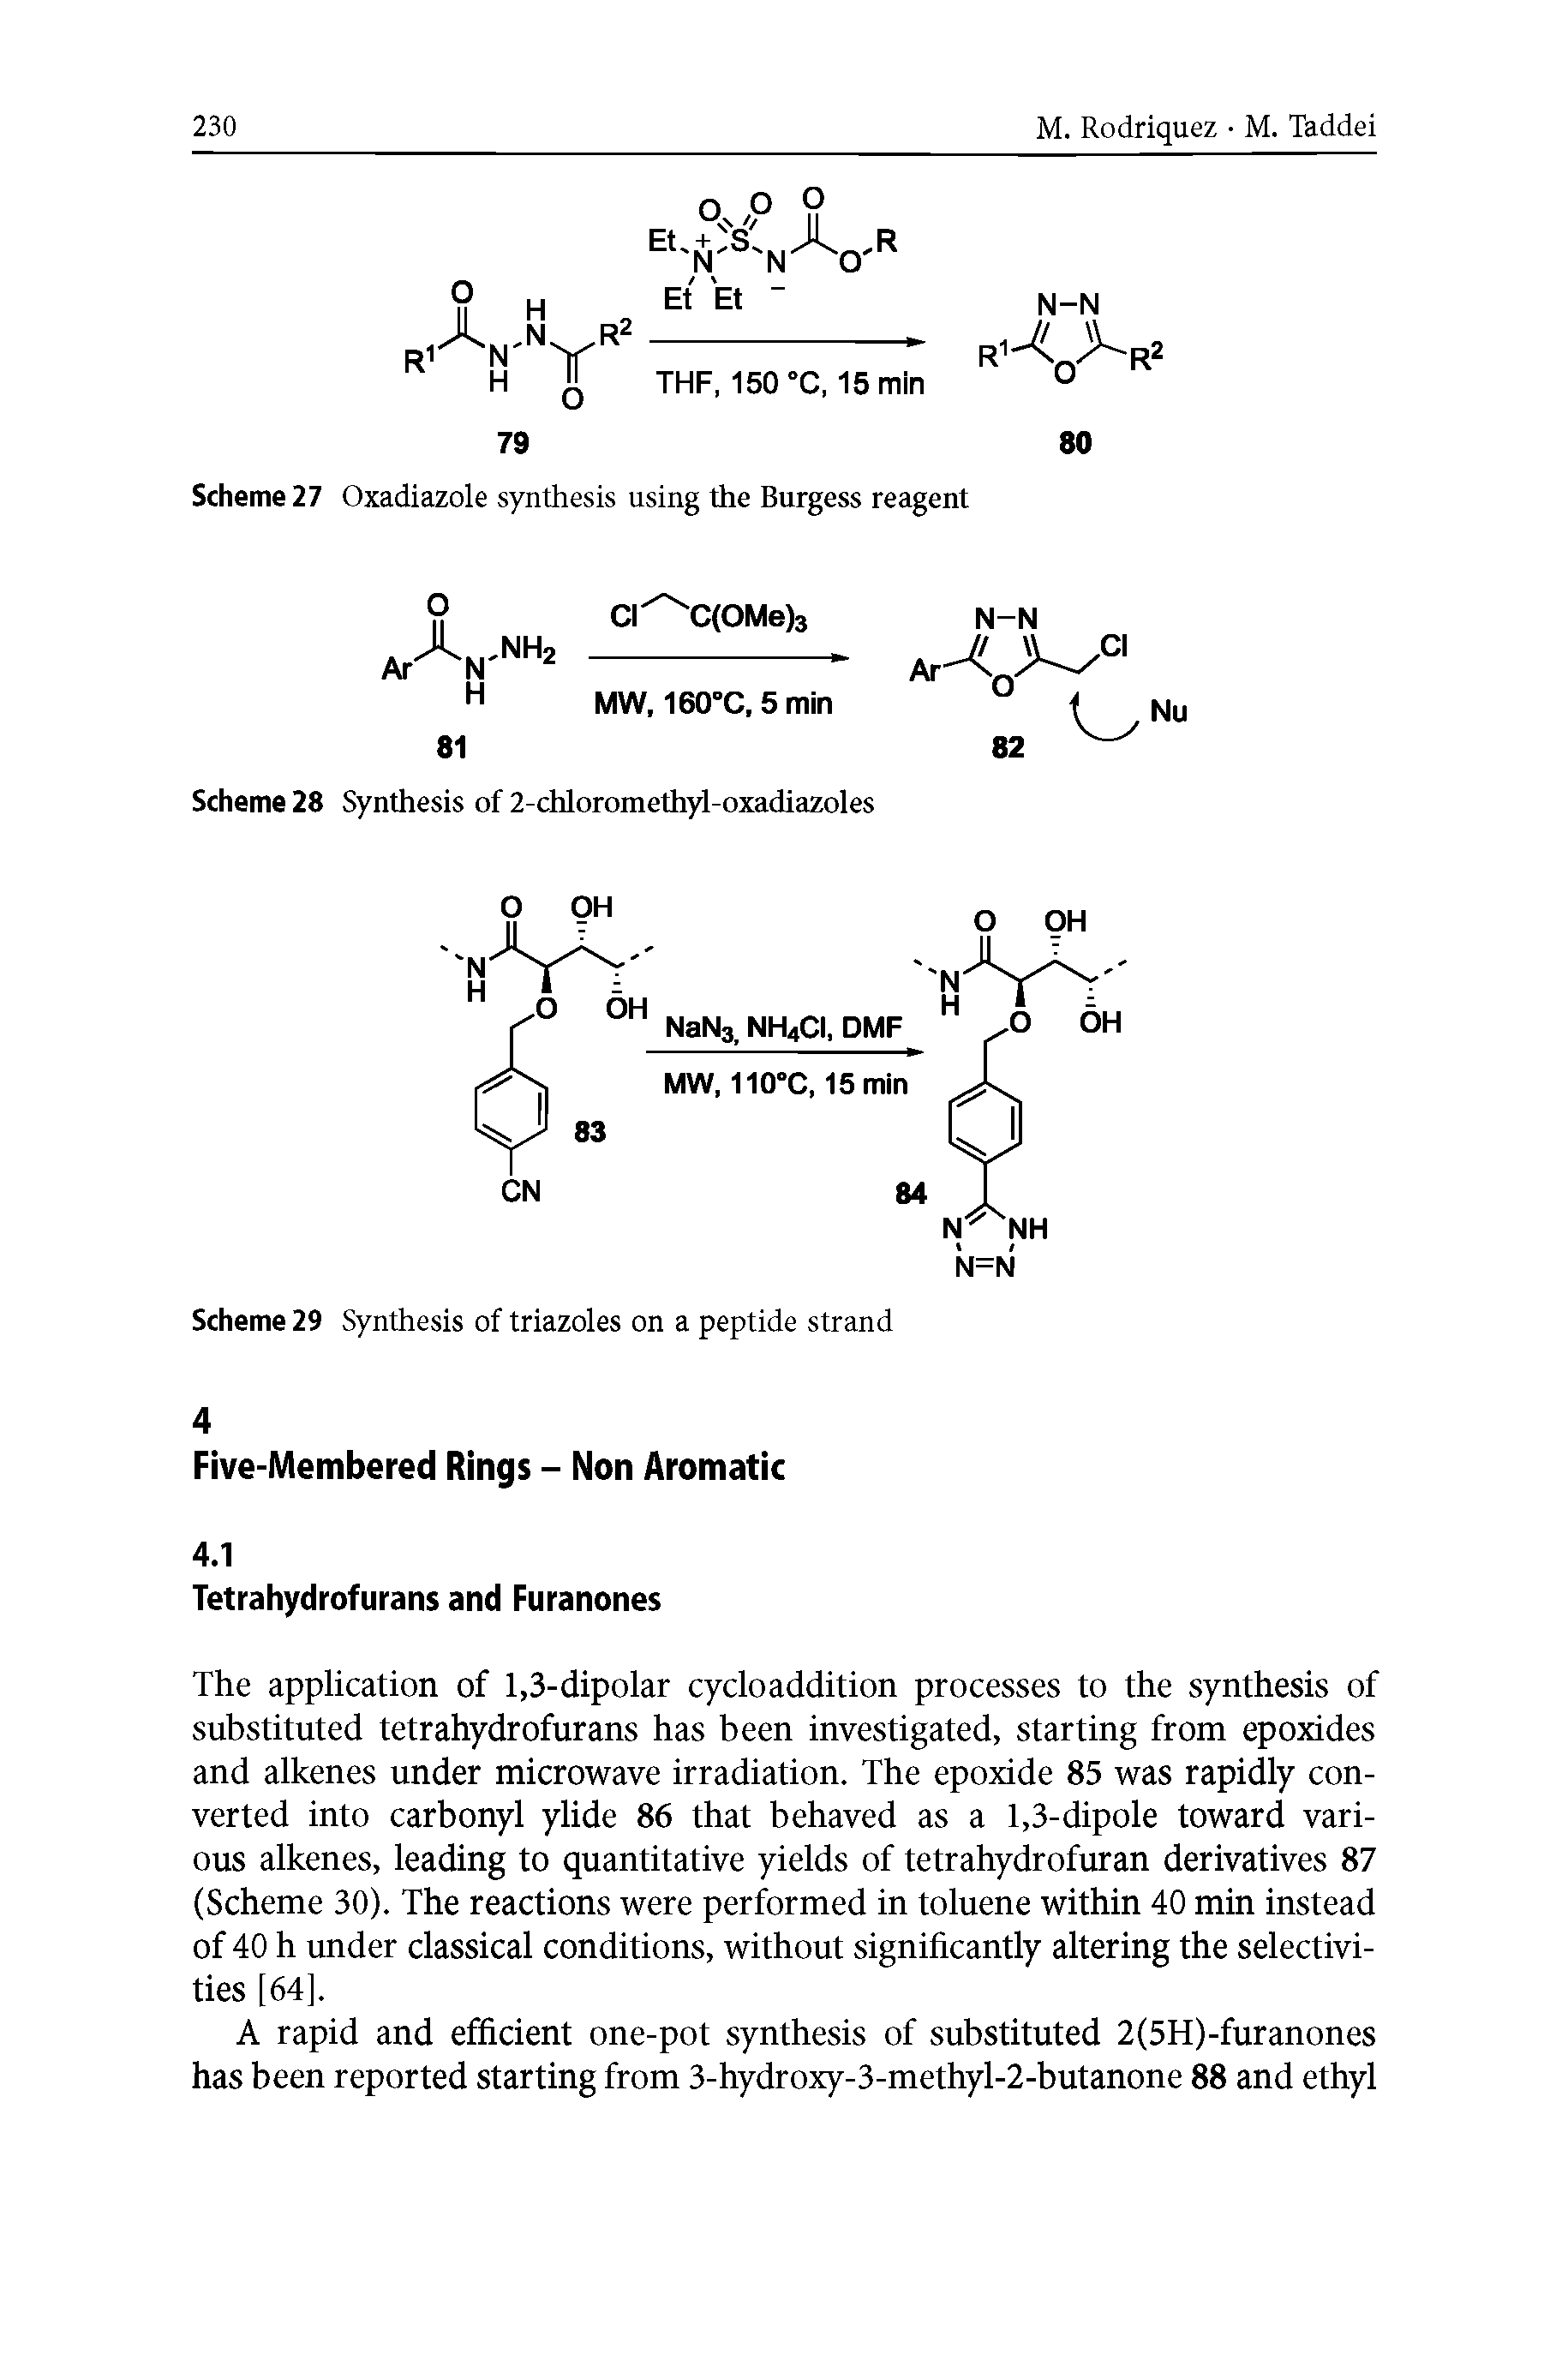 Scheme 27 Oxadiazole synthesis using the Burgess reagent...